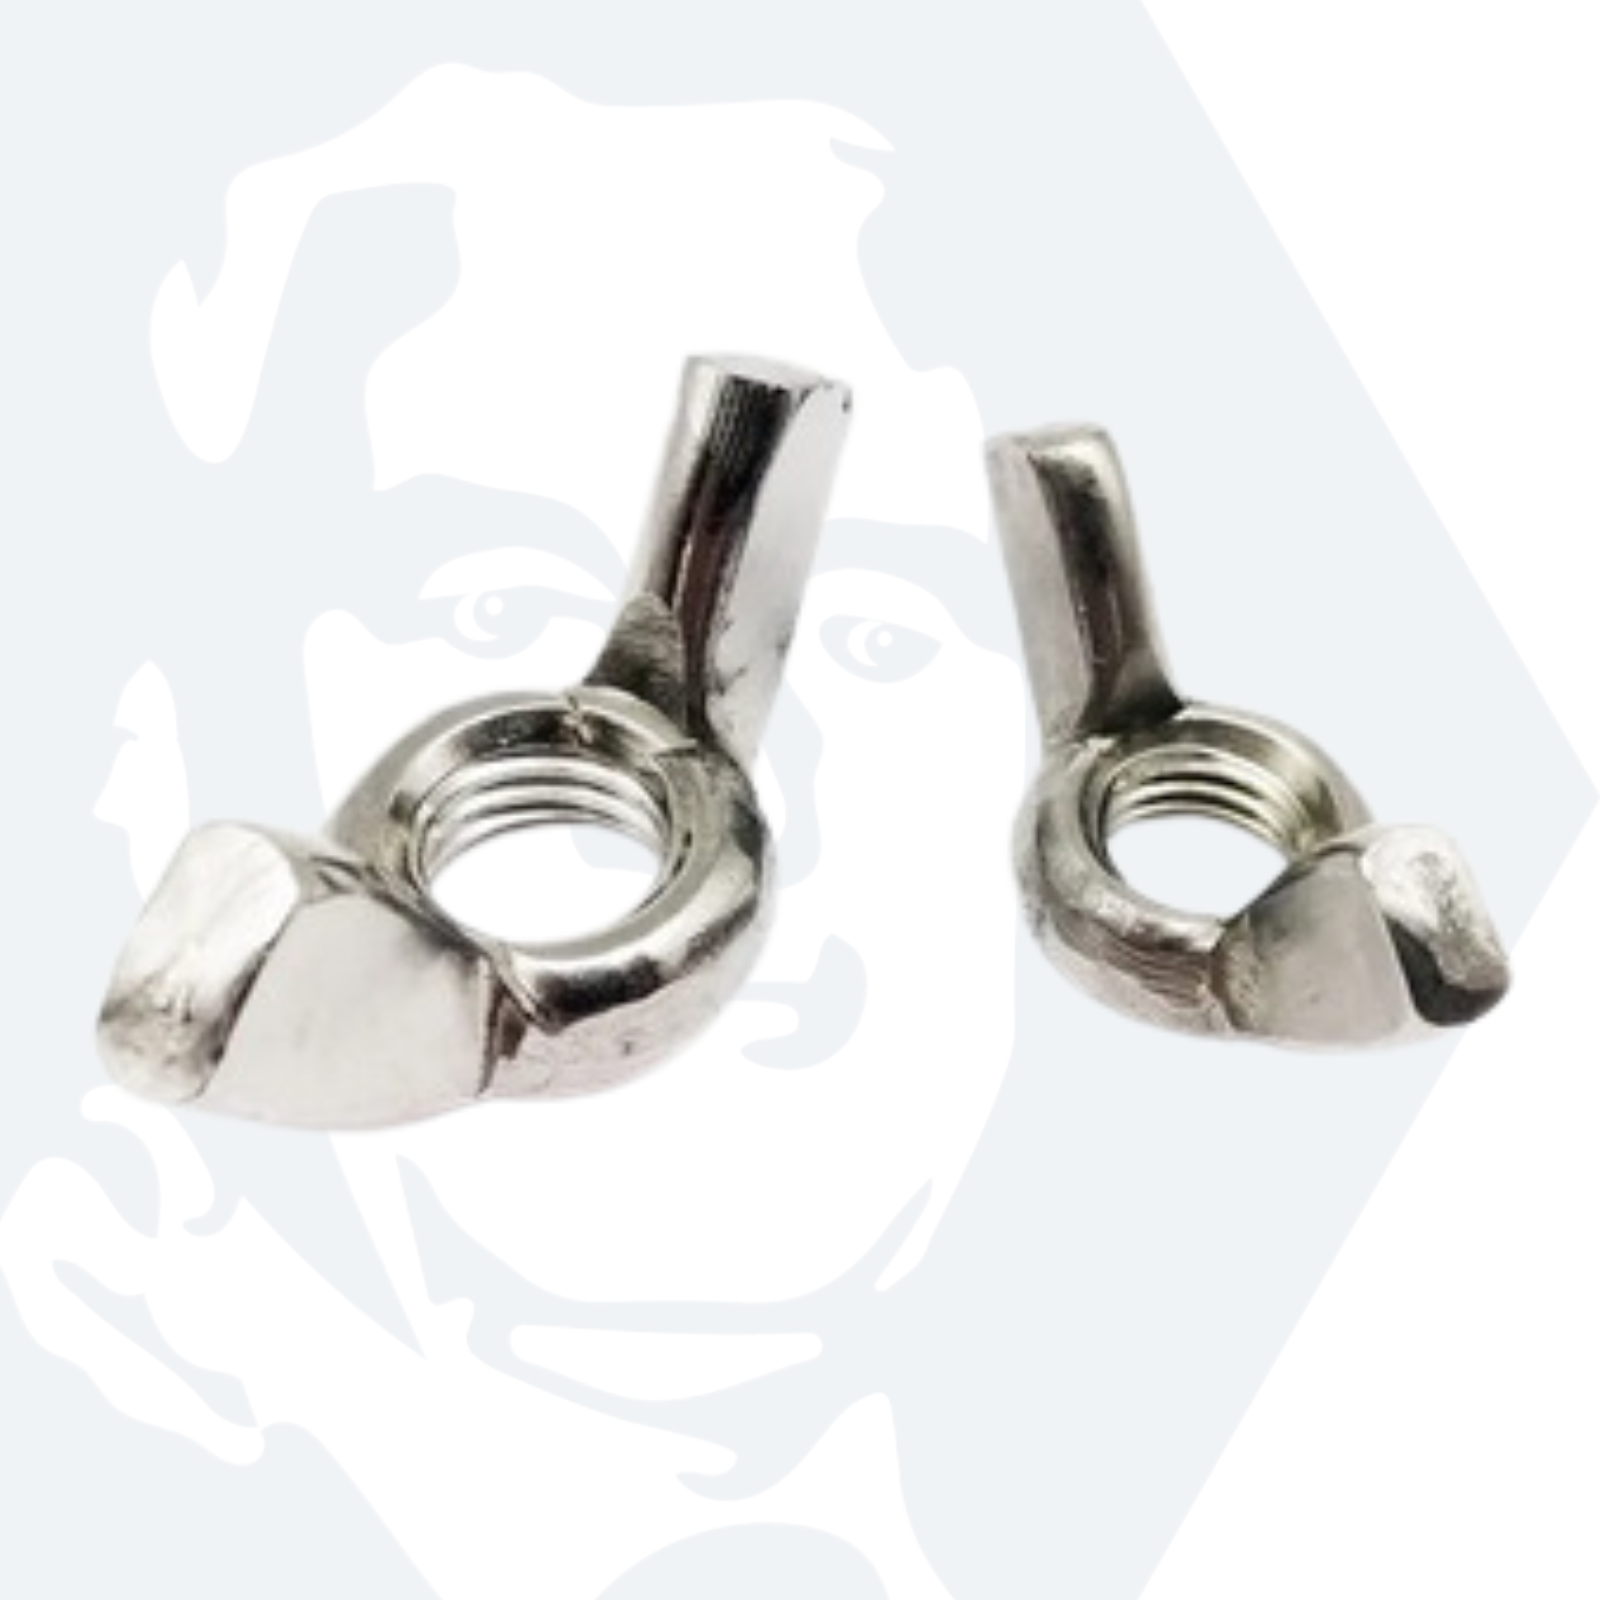 M3 Wing Nut (ISO) - Stainless Steel (A2)